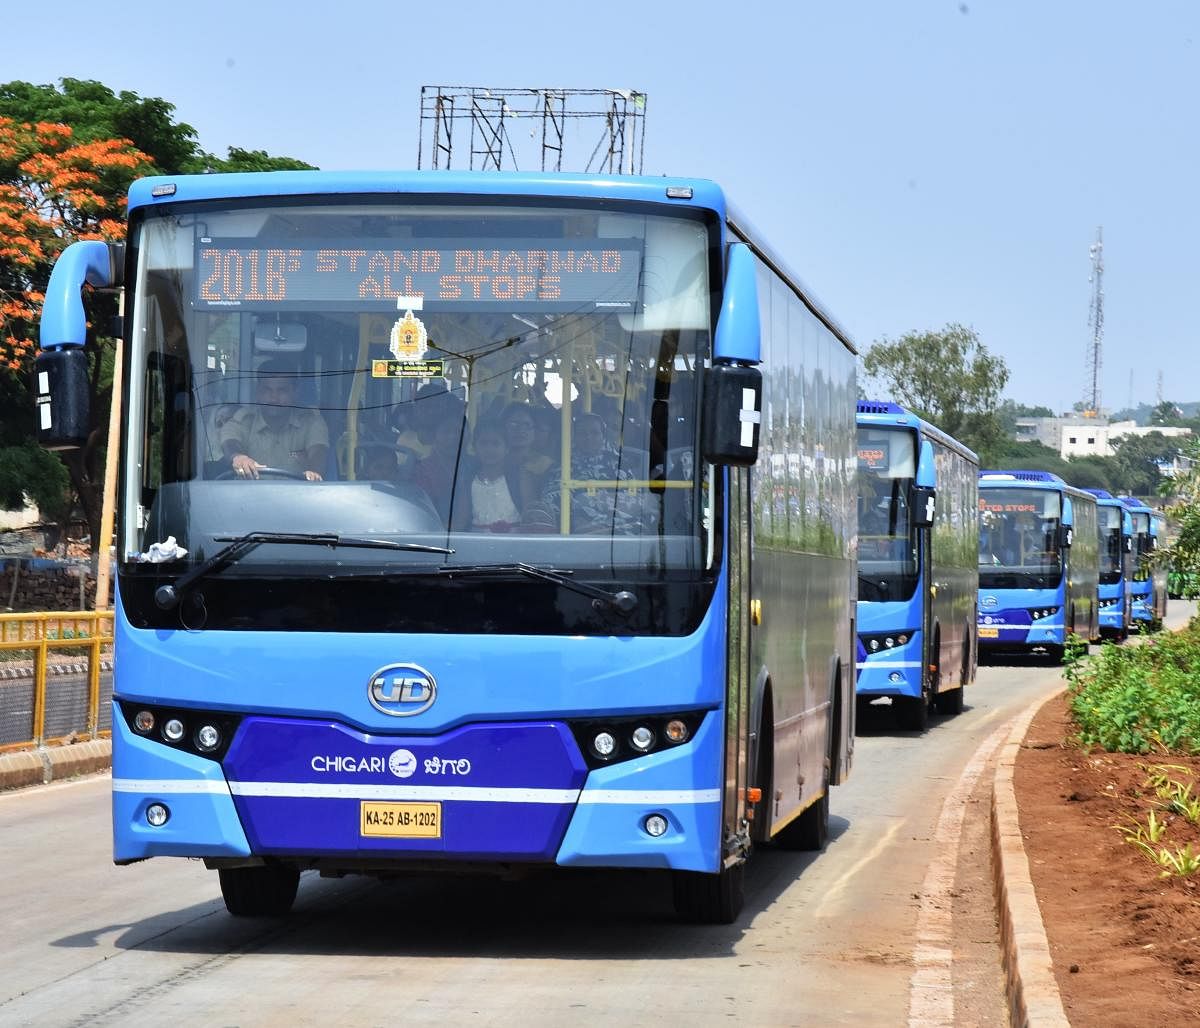 'Chigari' passengers rise by over 3 times in initial week